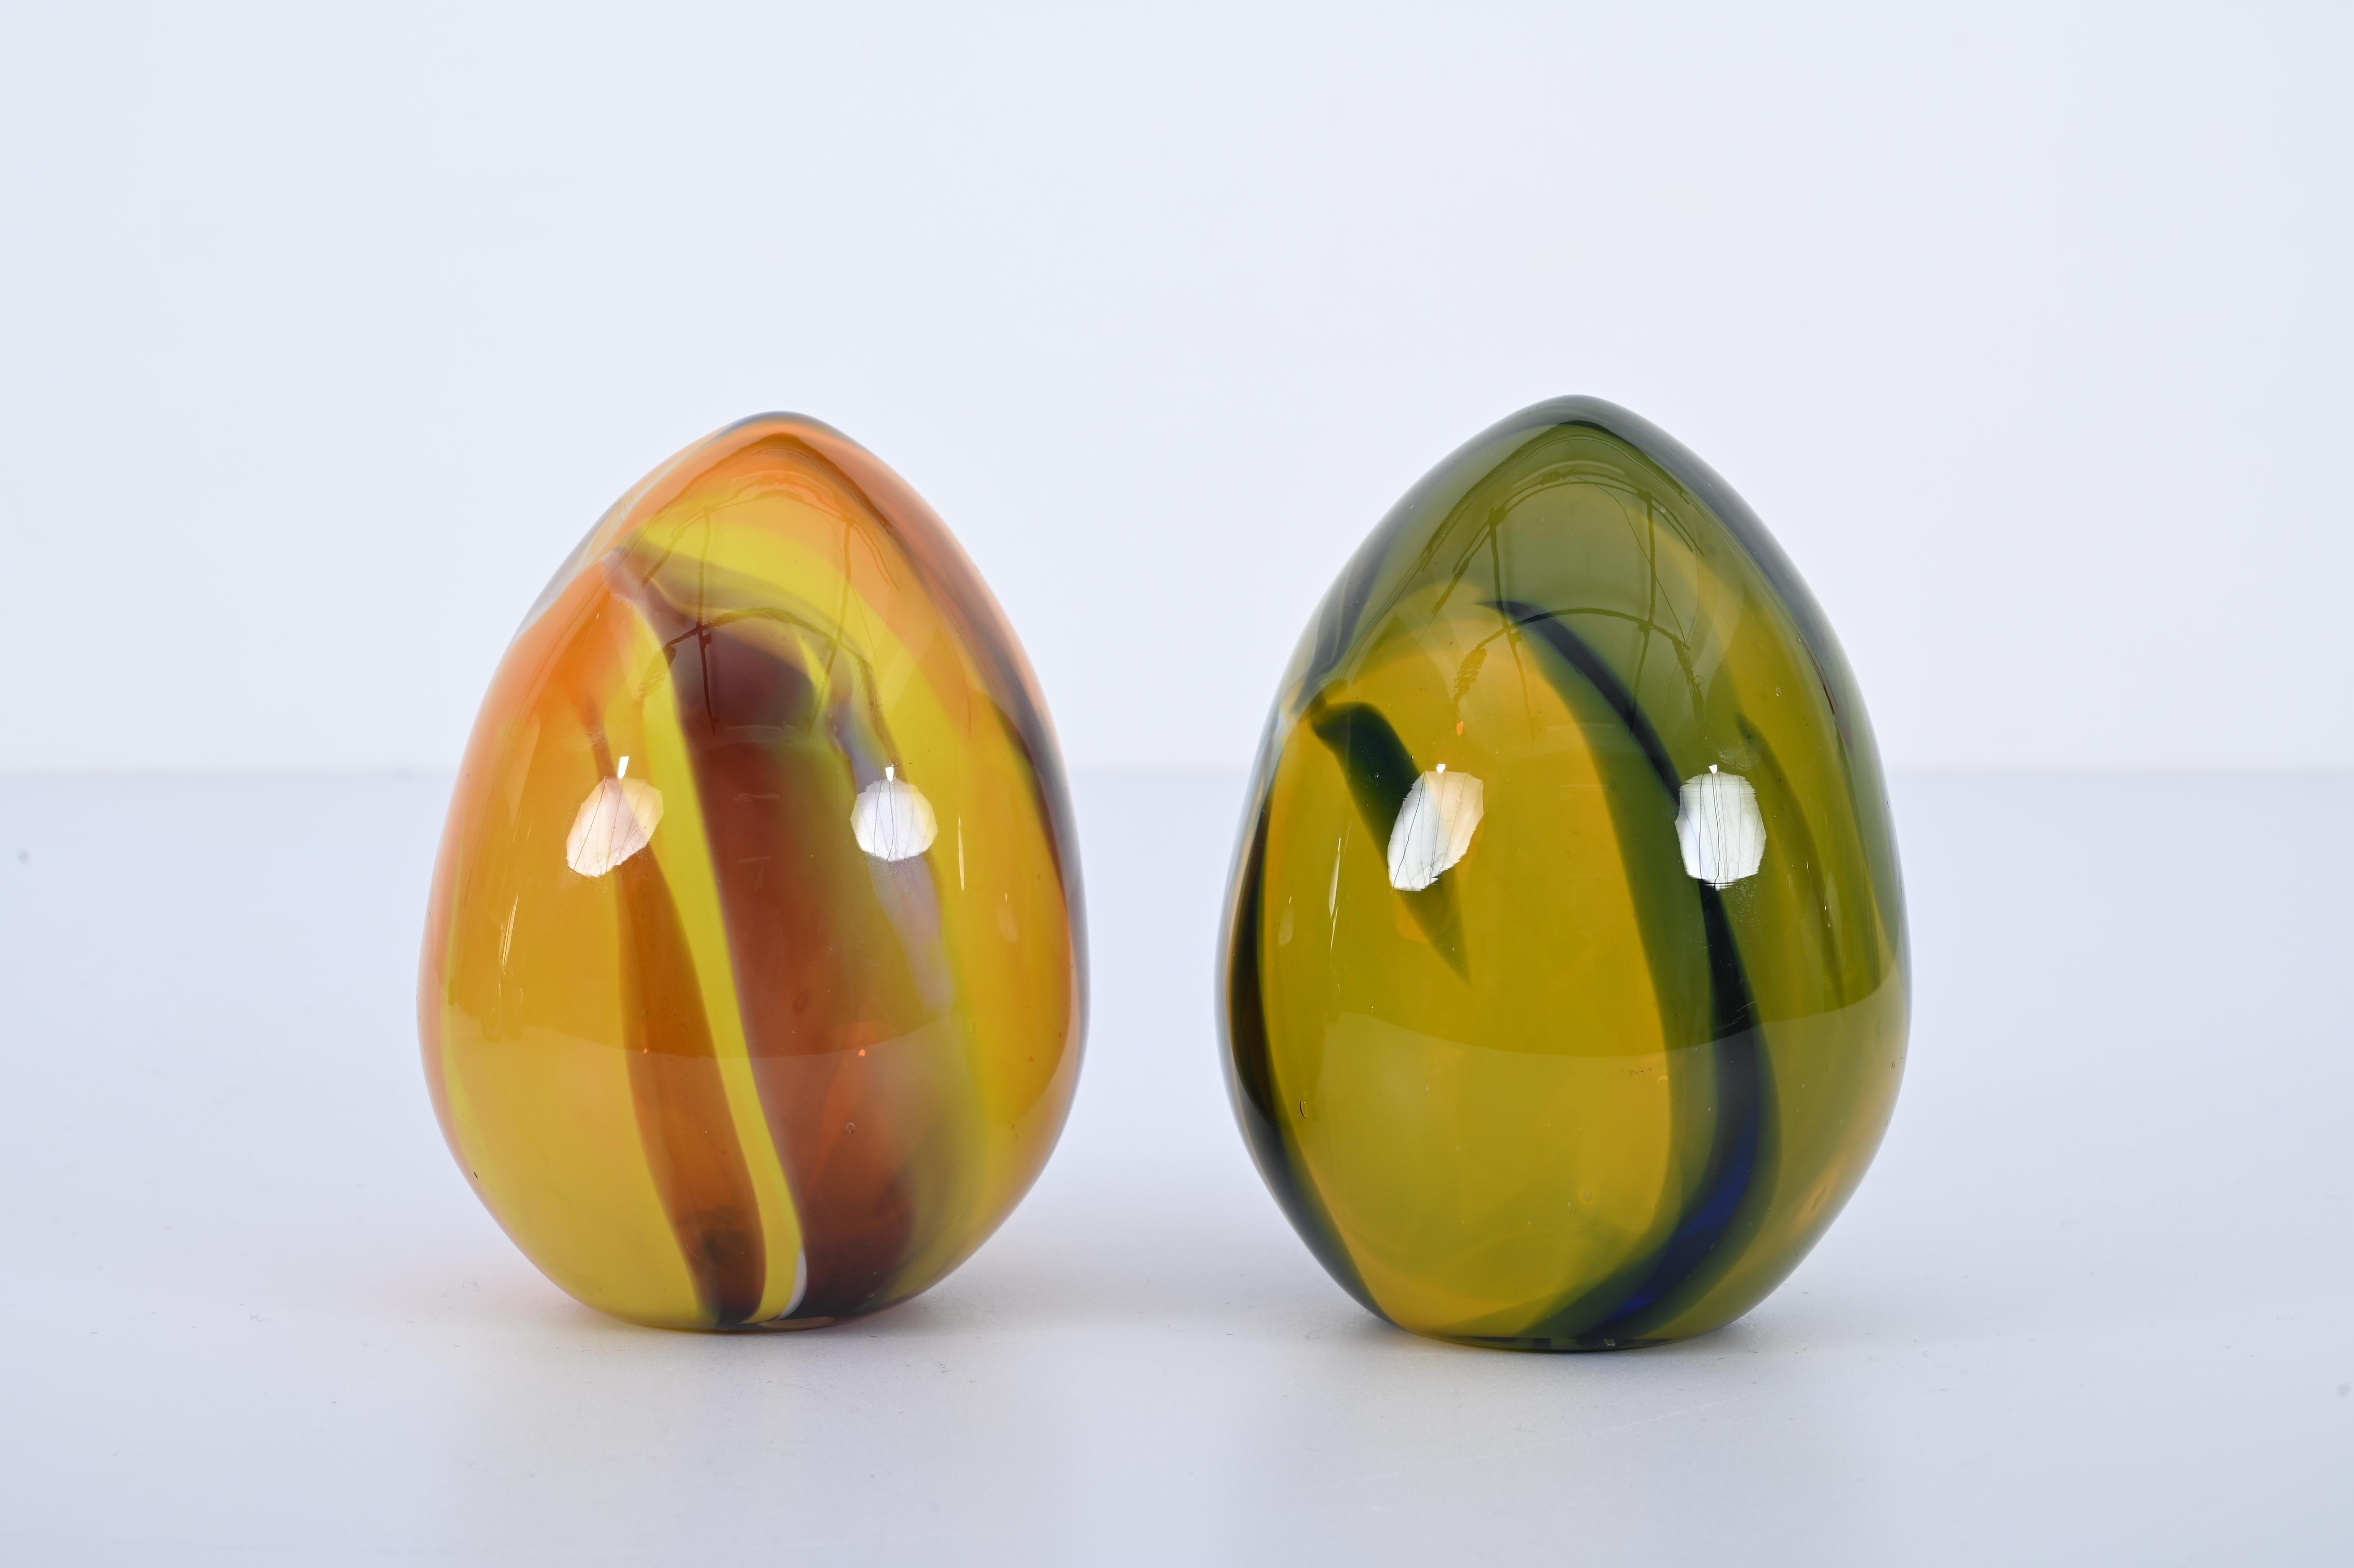 Set of Murano Hand-Blown Colored Glass Eggs, by Archimede Seguso, Italy, 1970s For Sale 3